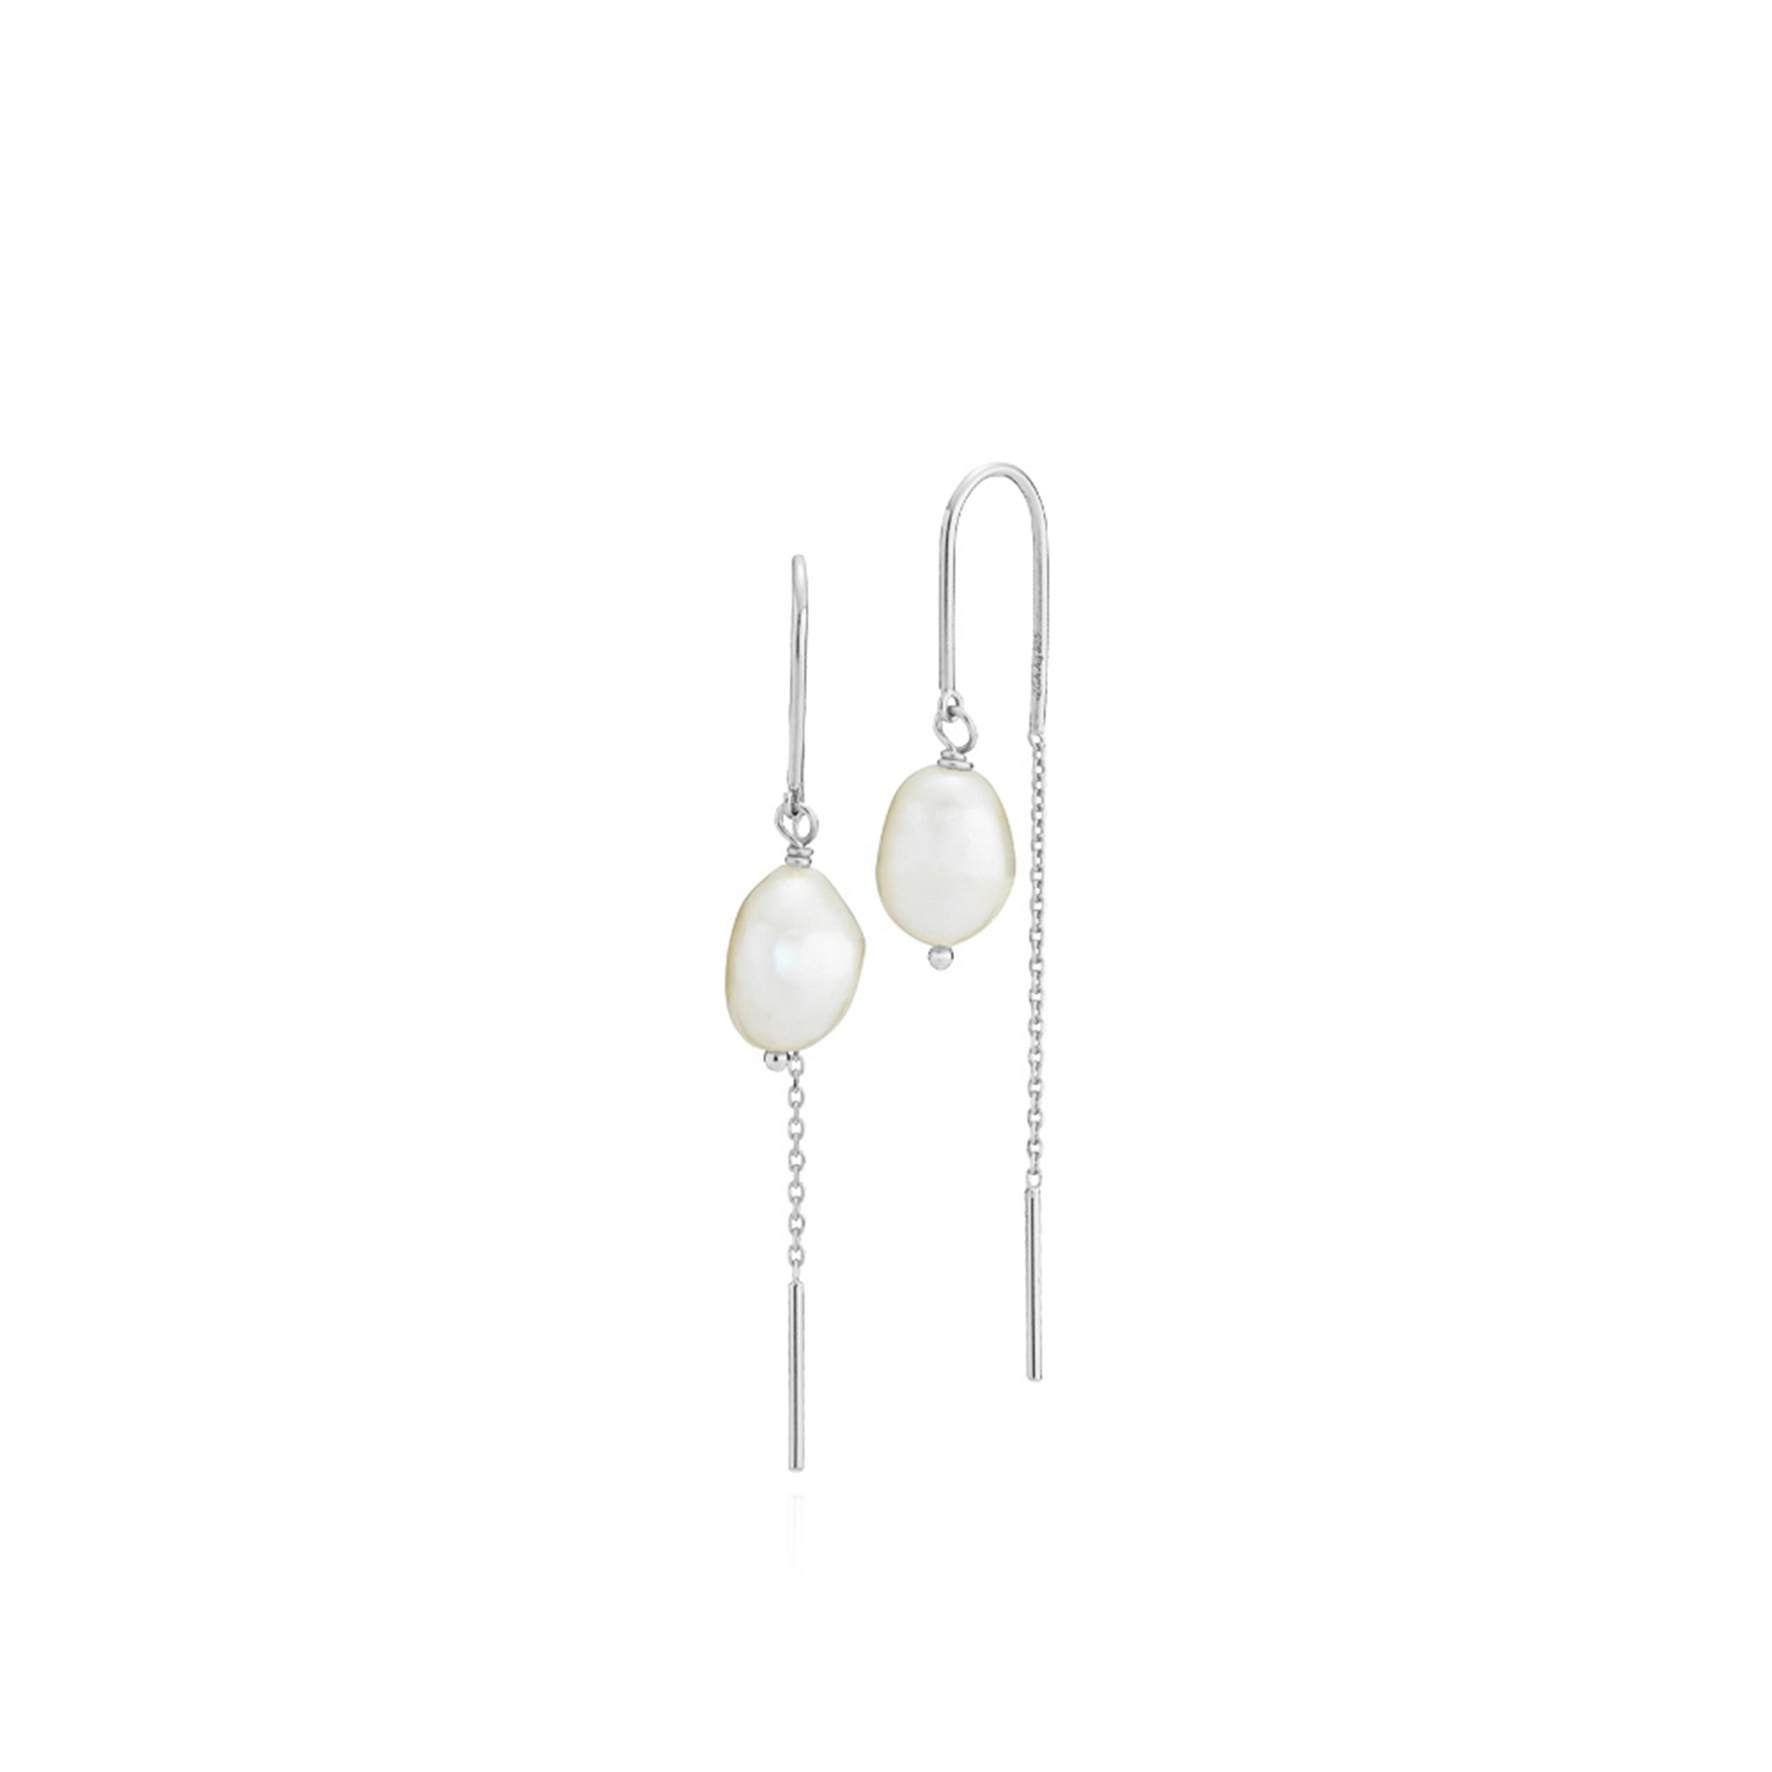 Caley Earchain With Pearl from Izabel Camille in Silver Sterling 925